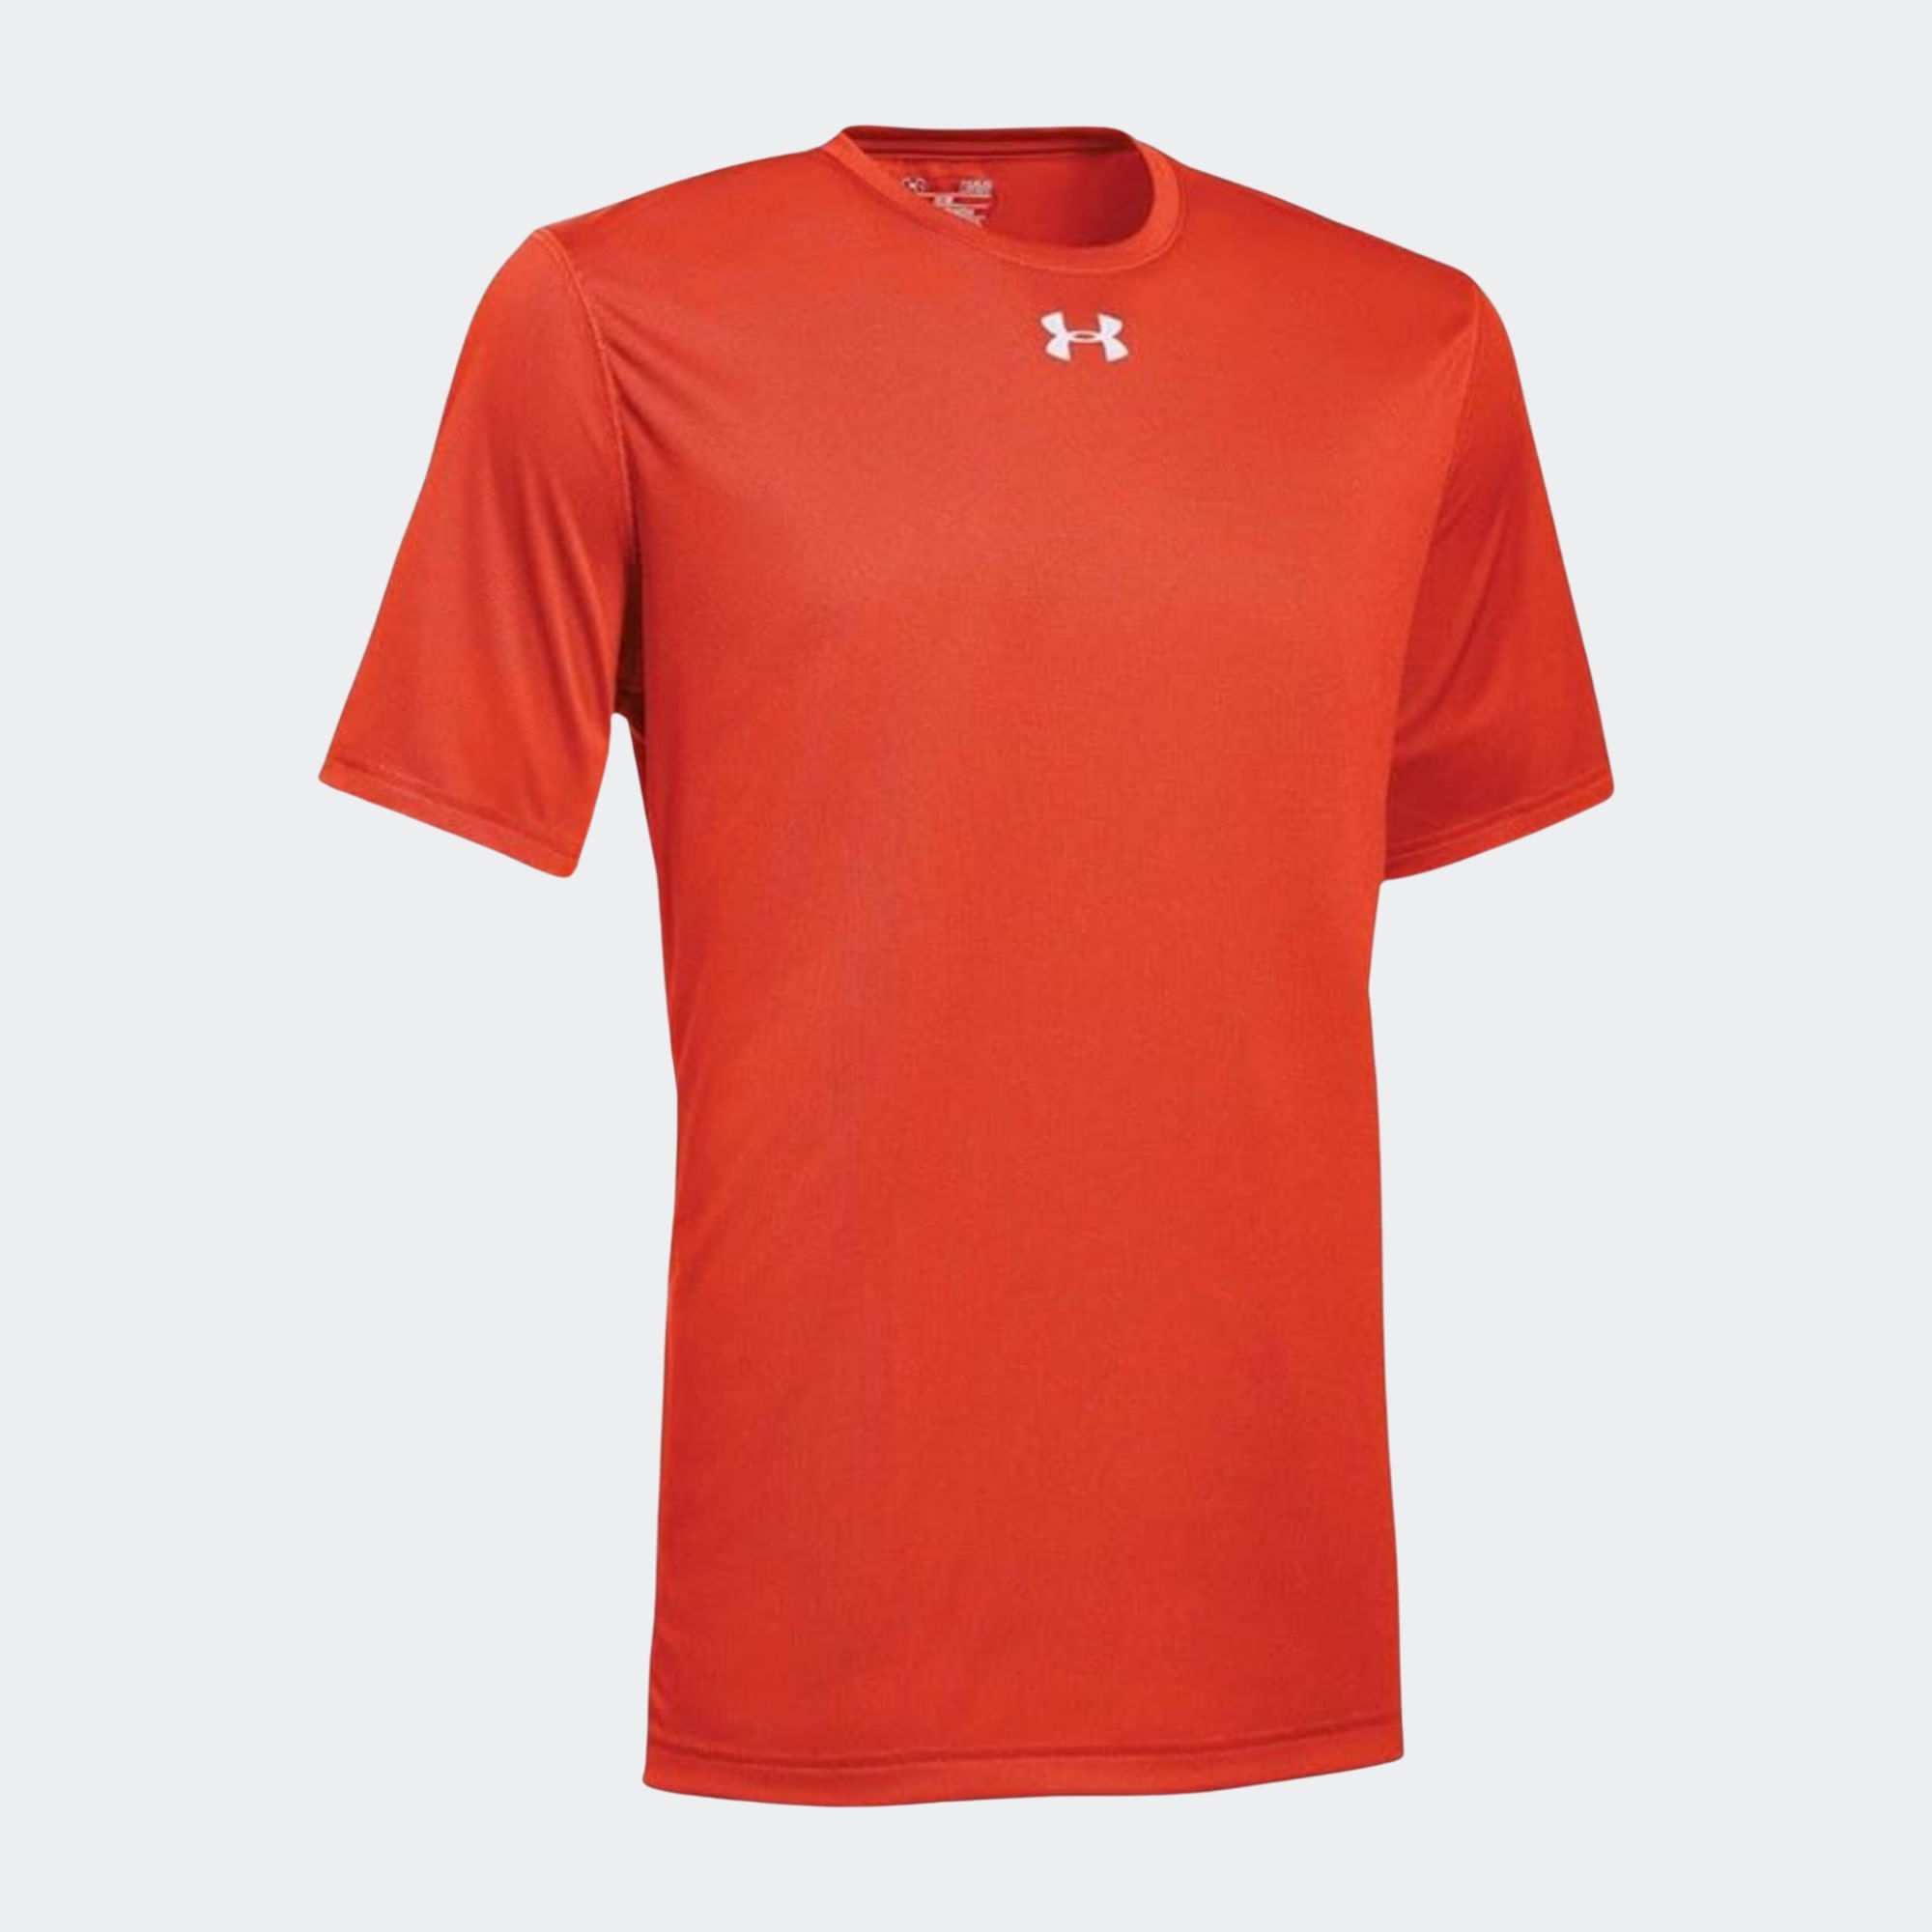 Remera Mujer Under Armour Tech Graphic - JJ Deportes